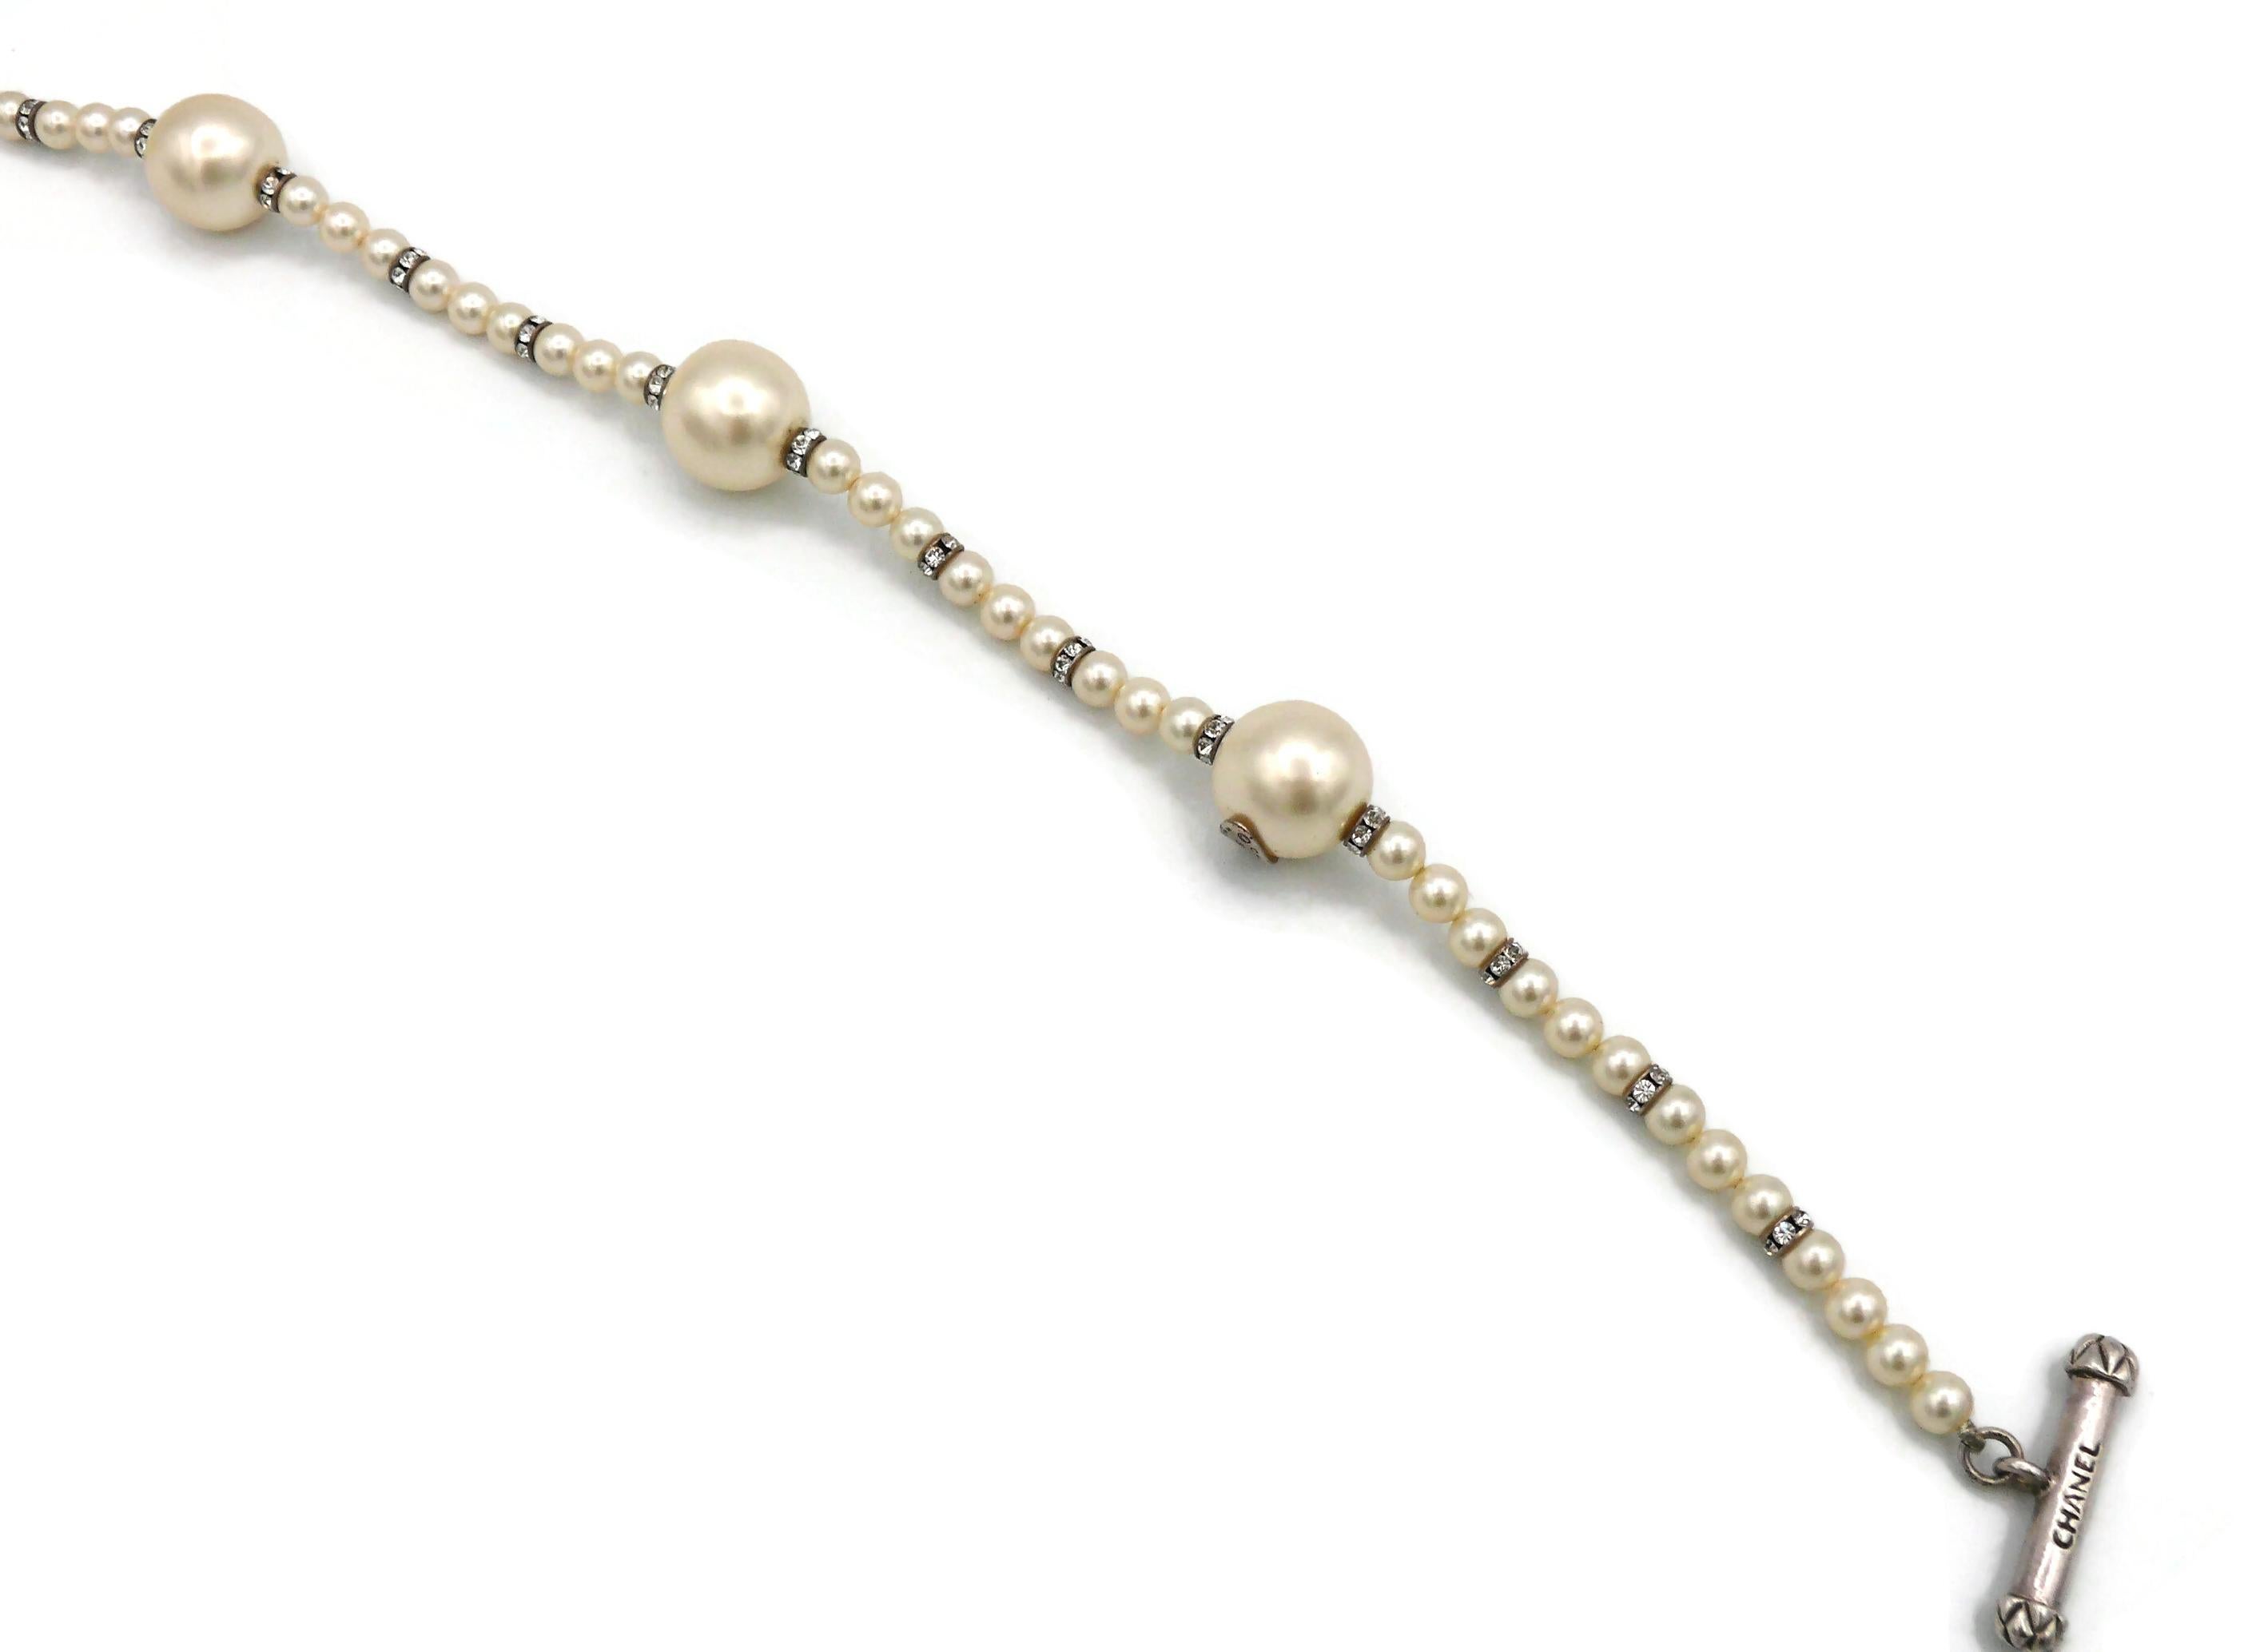 CHANEL by KARL LAGERFELD Vintage Faux Pearl and Crystal Necklace, Fall 1993 For Sale 8